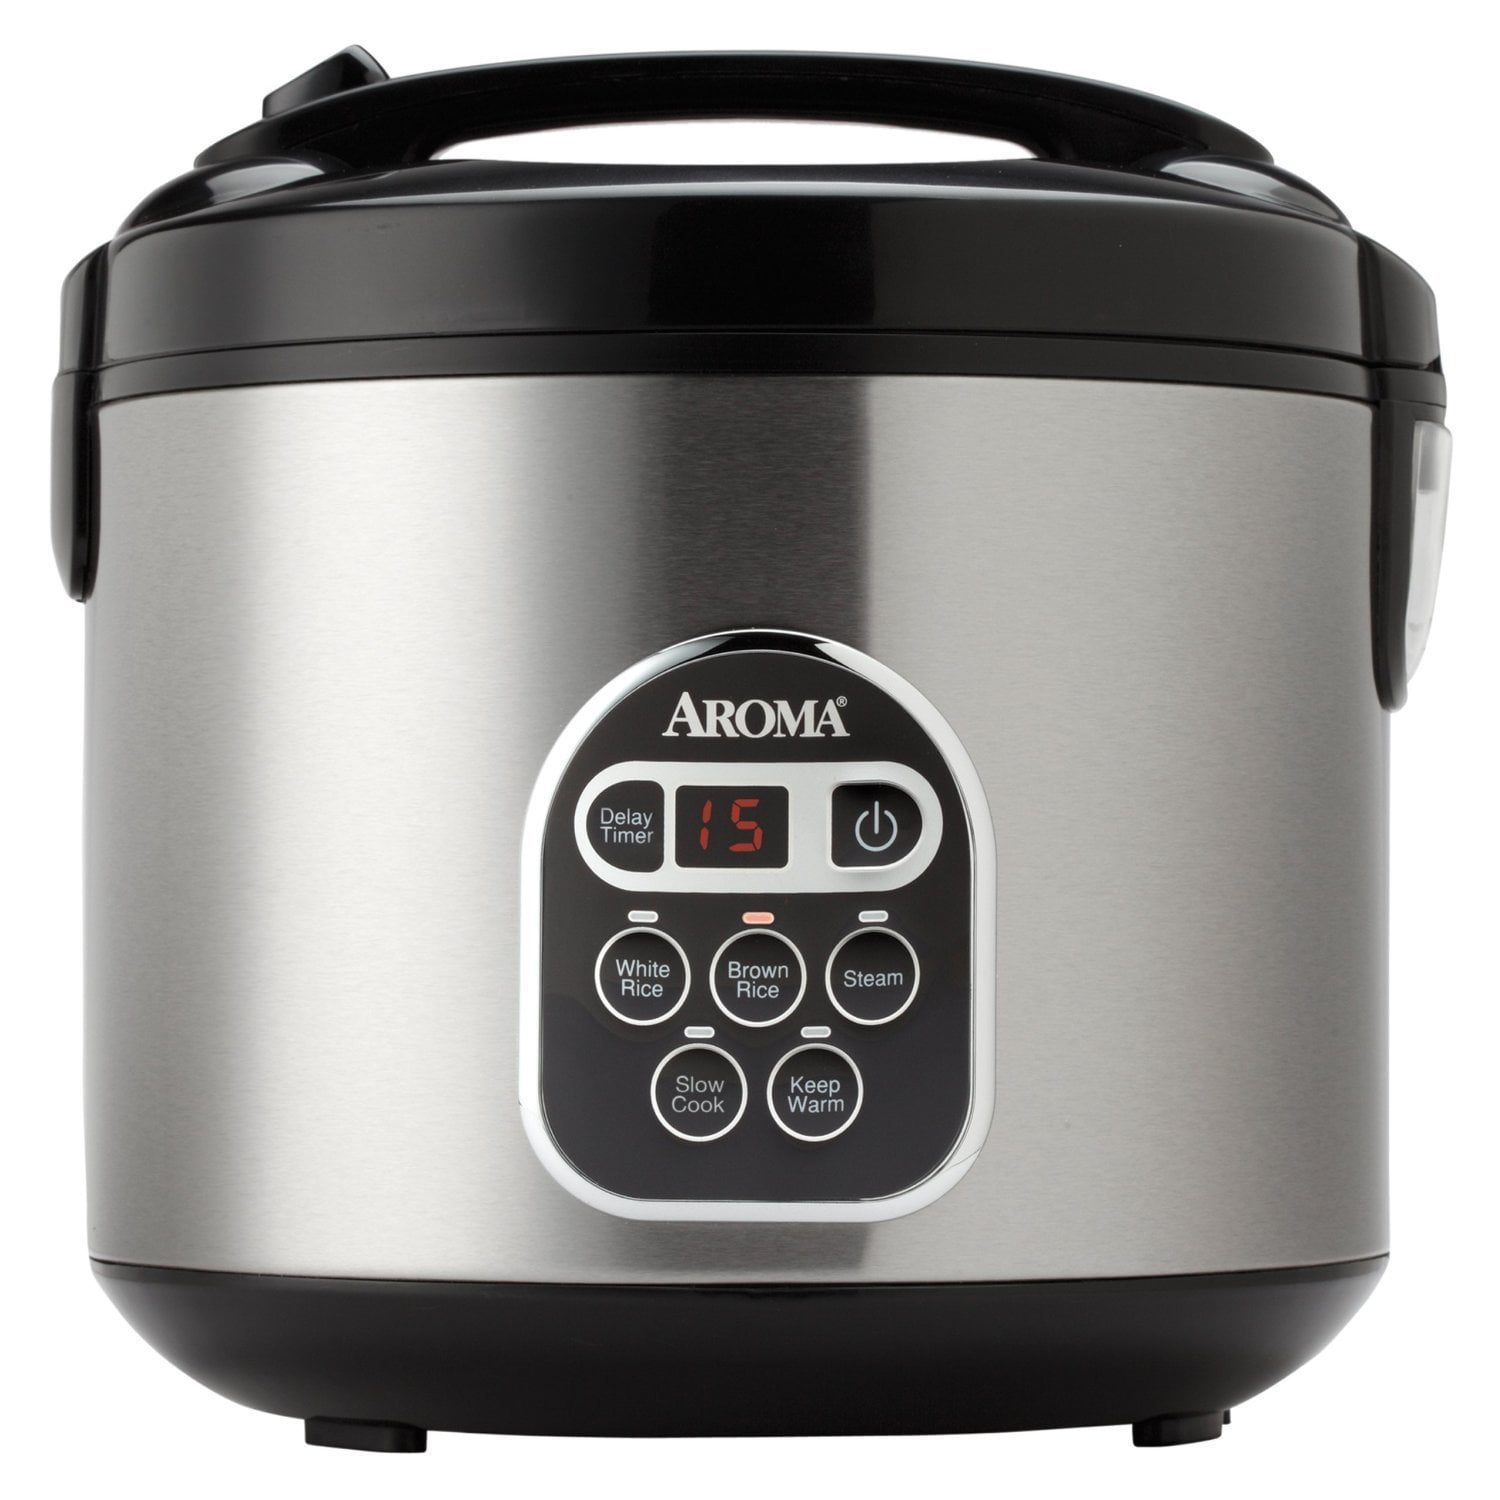 Aroma Rice Cooker Instructions And Recipe Story • Love From The Oven